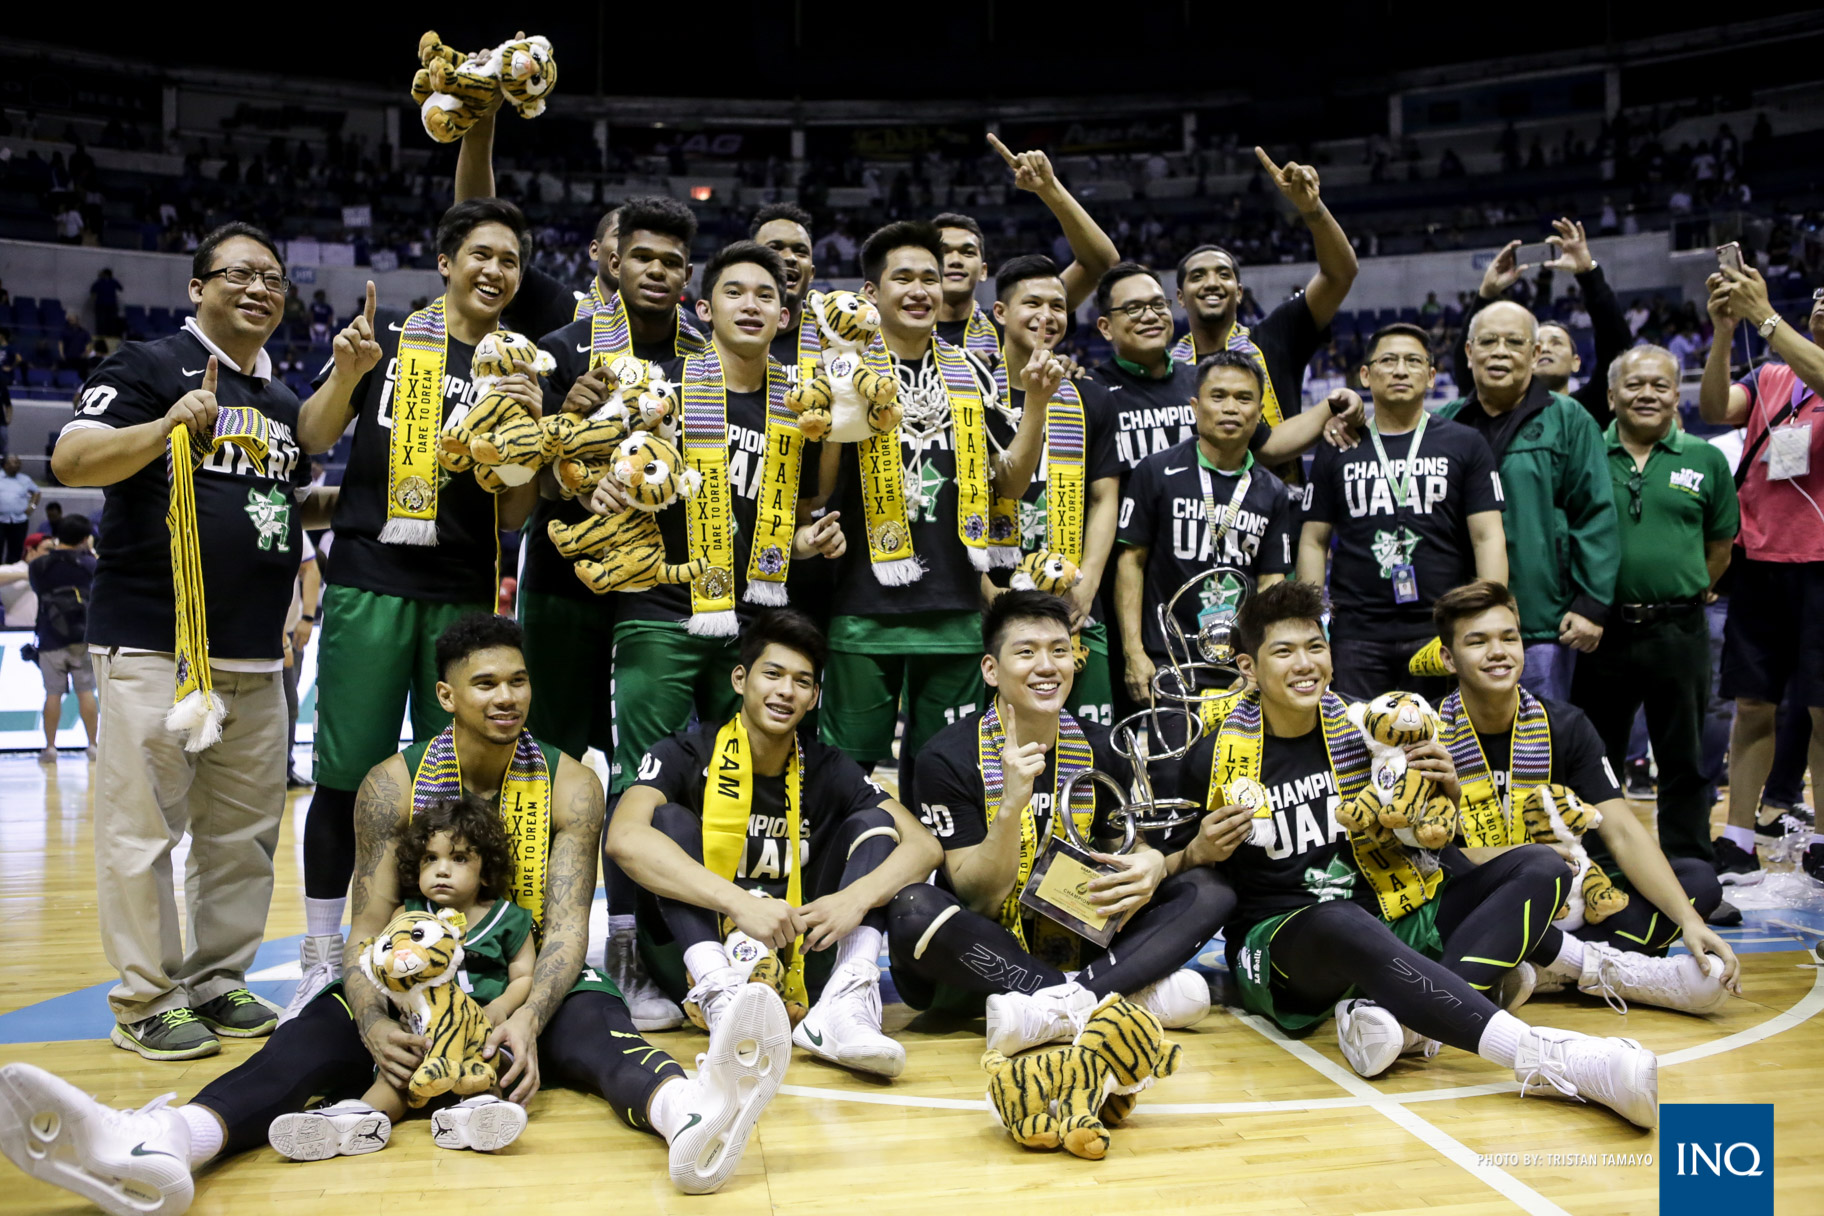 La Salle celebrates its ninth overall championship. Photo by Tristan Tamayo/INQUIRER.net